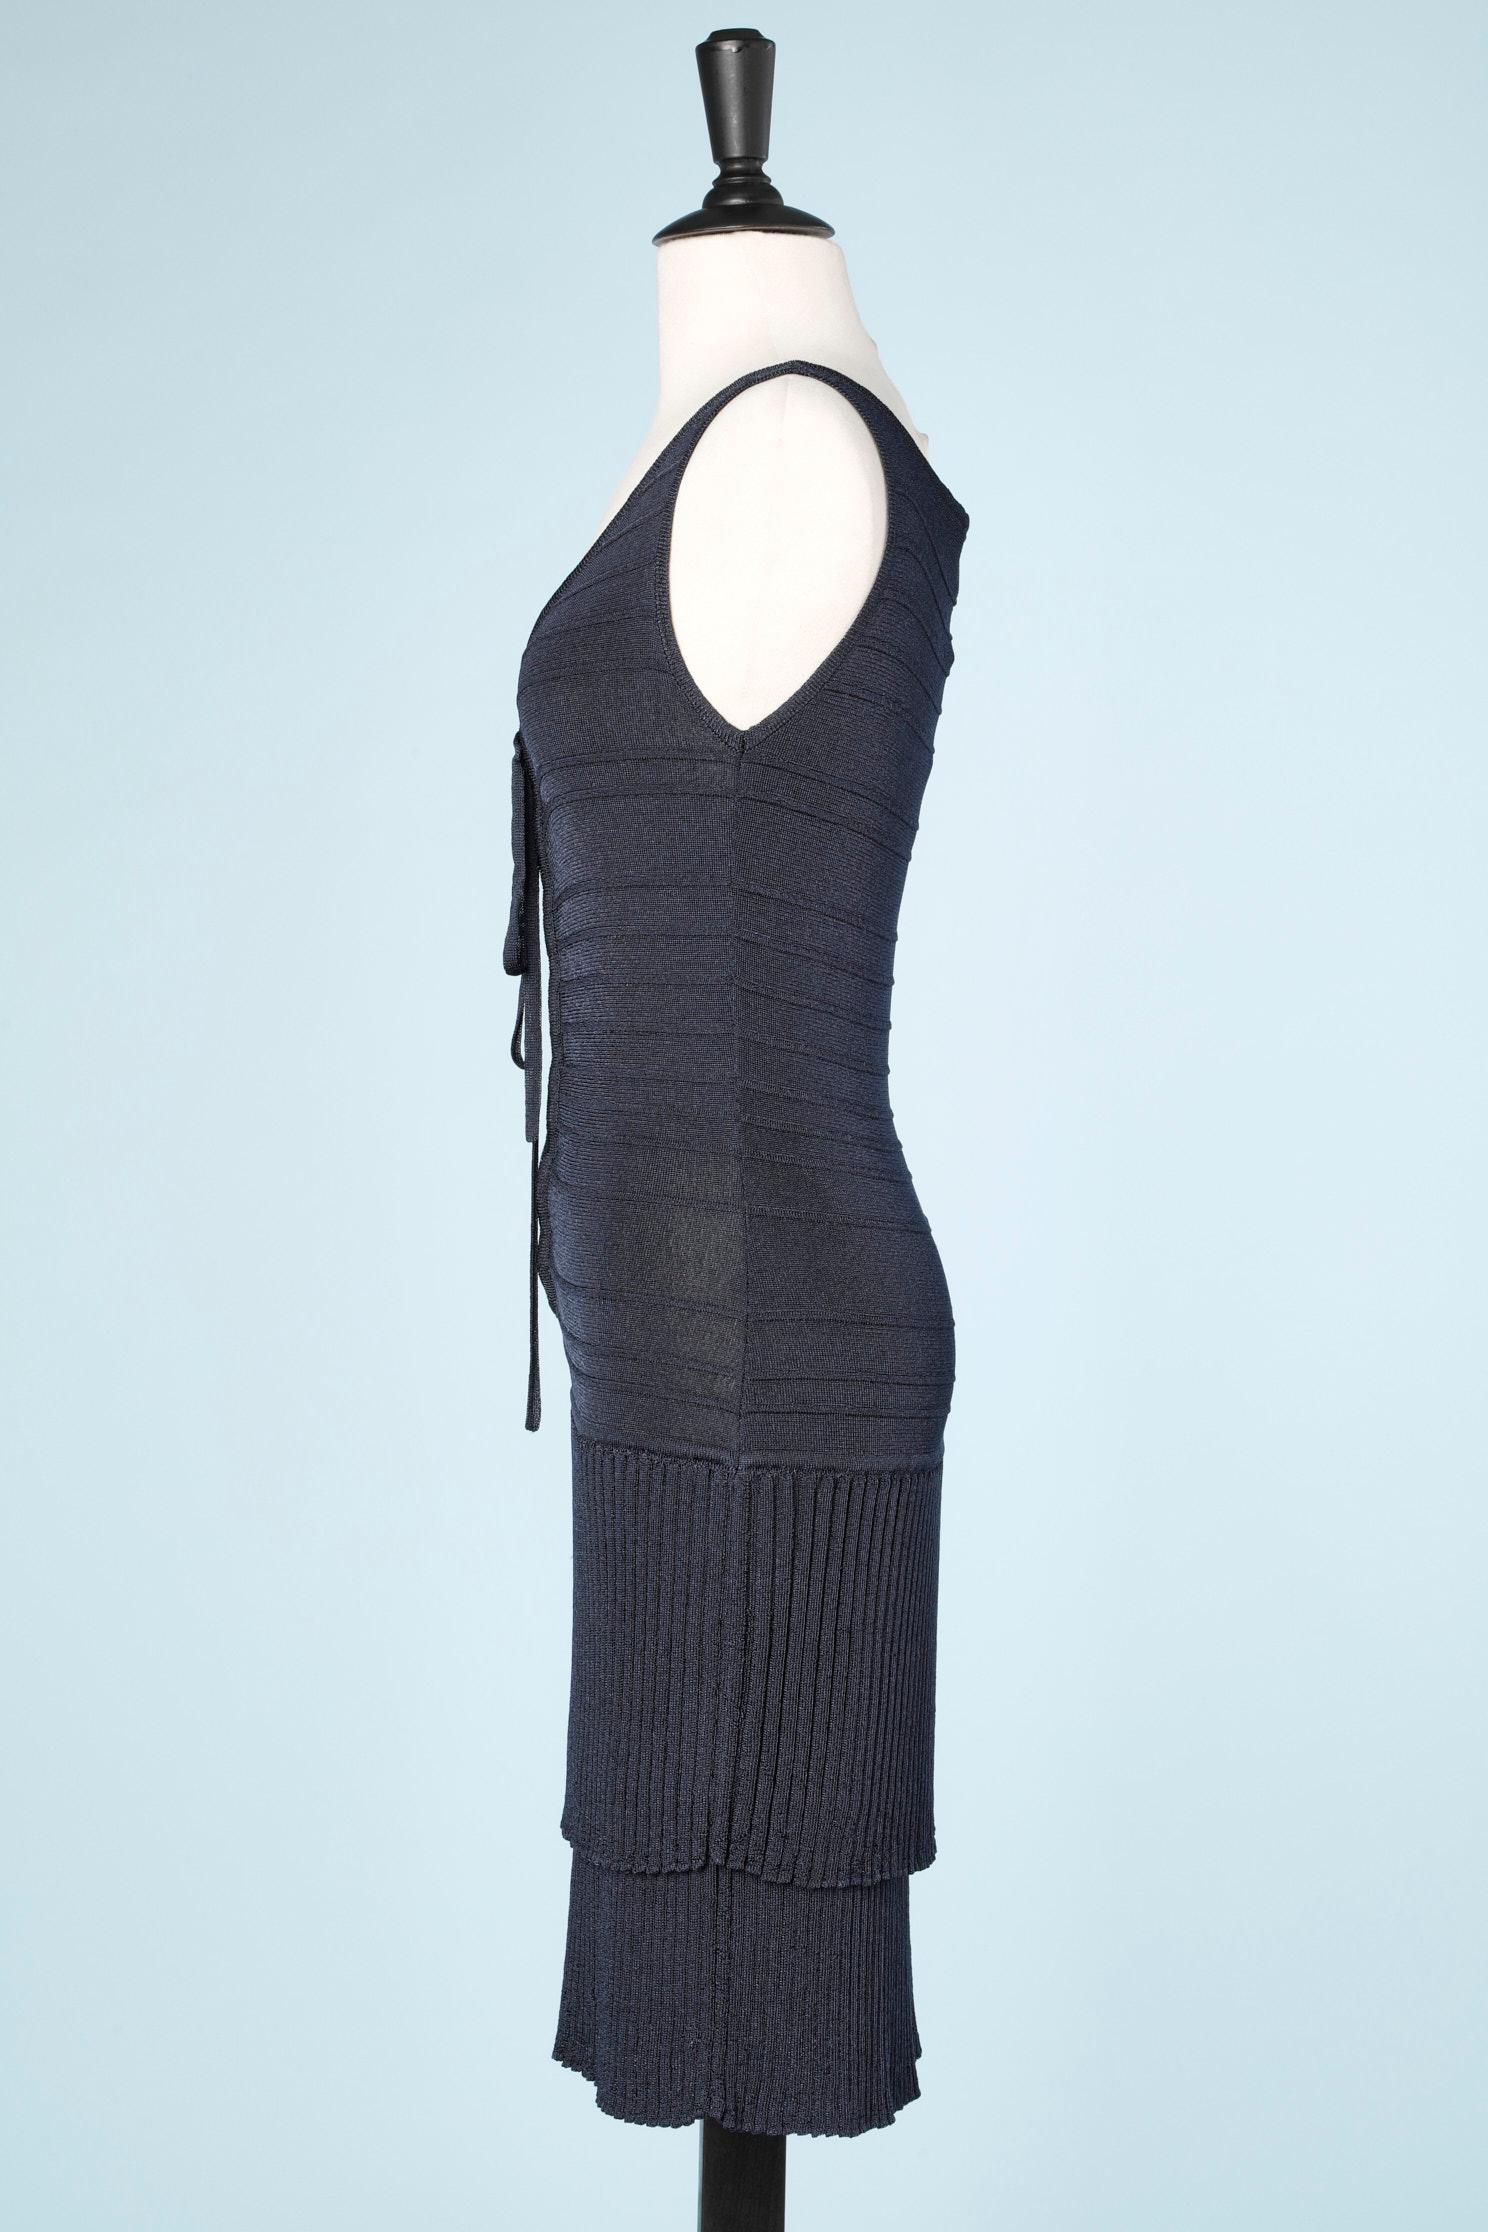 Dress and Boléro in navy blue viscose knit Luisa Spagnoli  In Excellent Condition For Sale In Saint-Ouen-Sur-Seine, FR